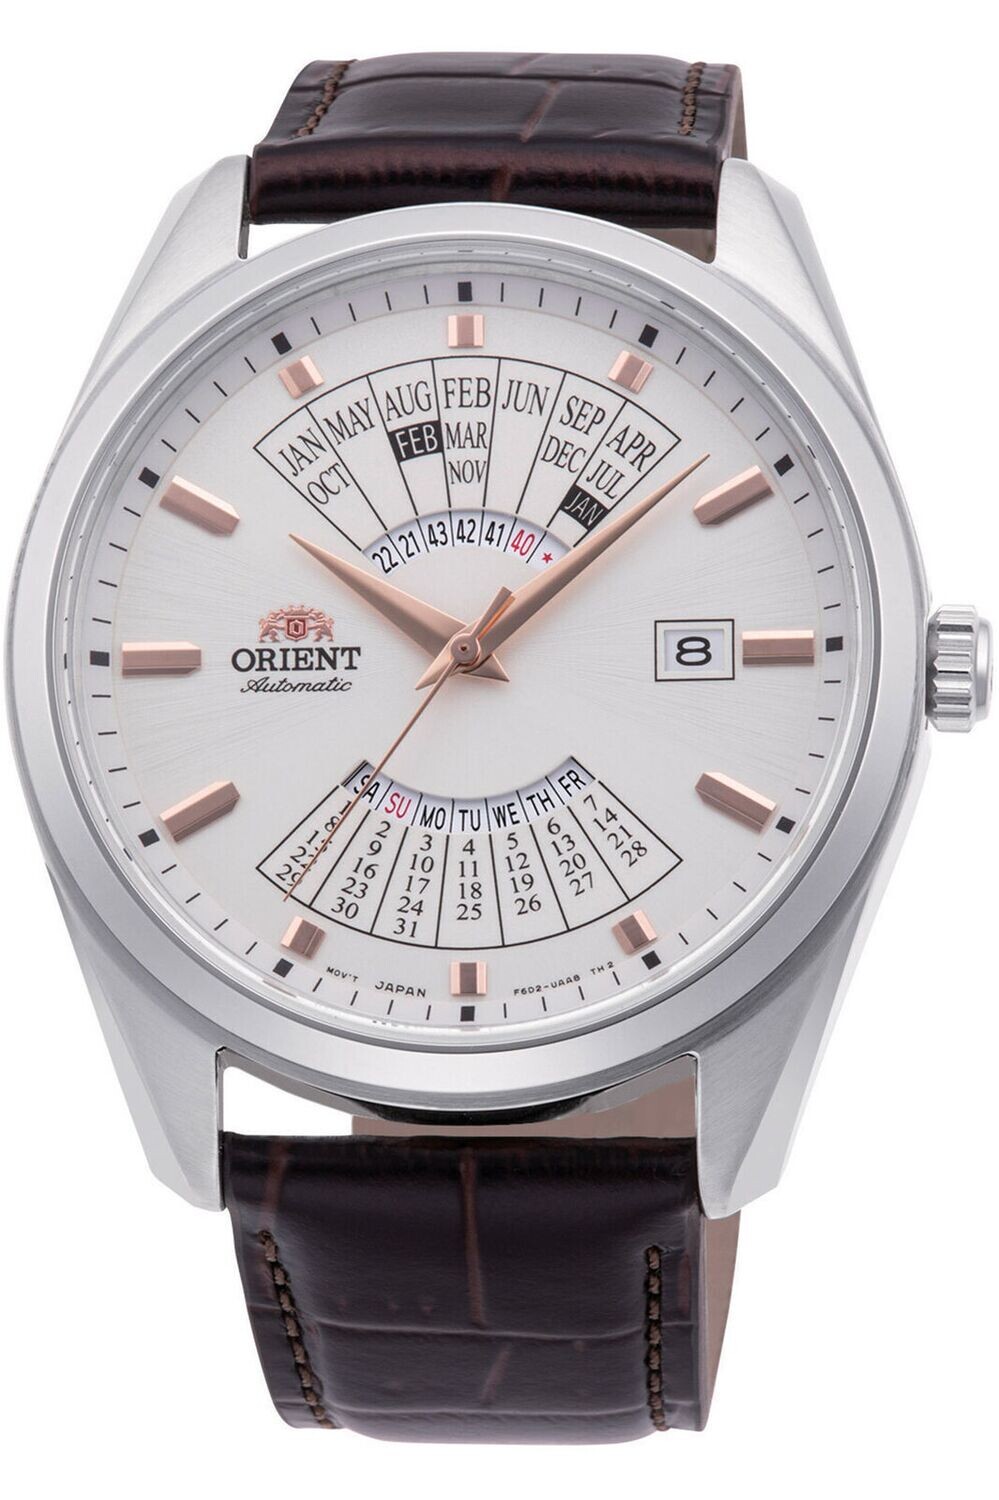 Orient Multi Year Calendar RA-BA0005S automatic men's watch white dial 43.5mm leather band 50m water resist hand-hacking self-winding